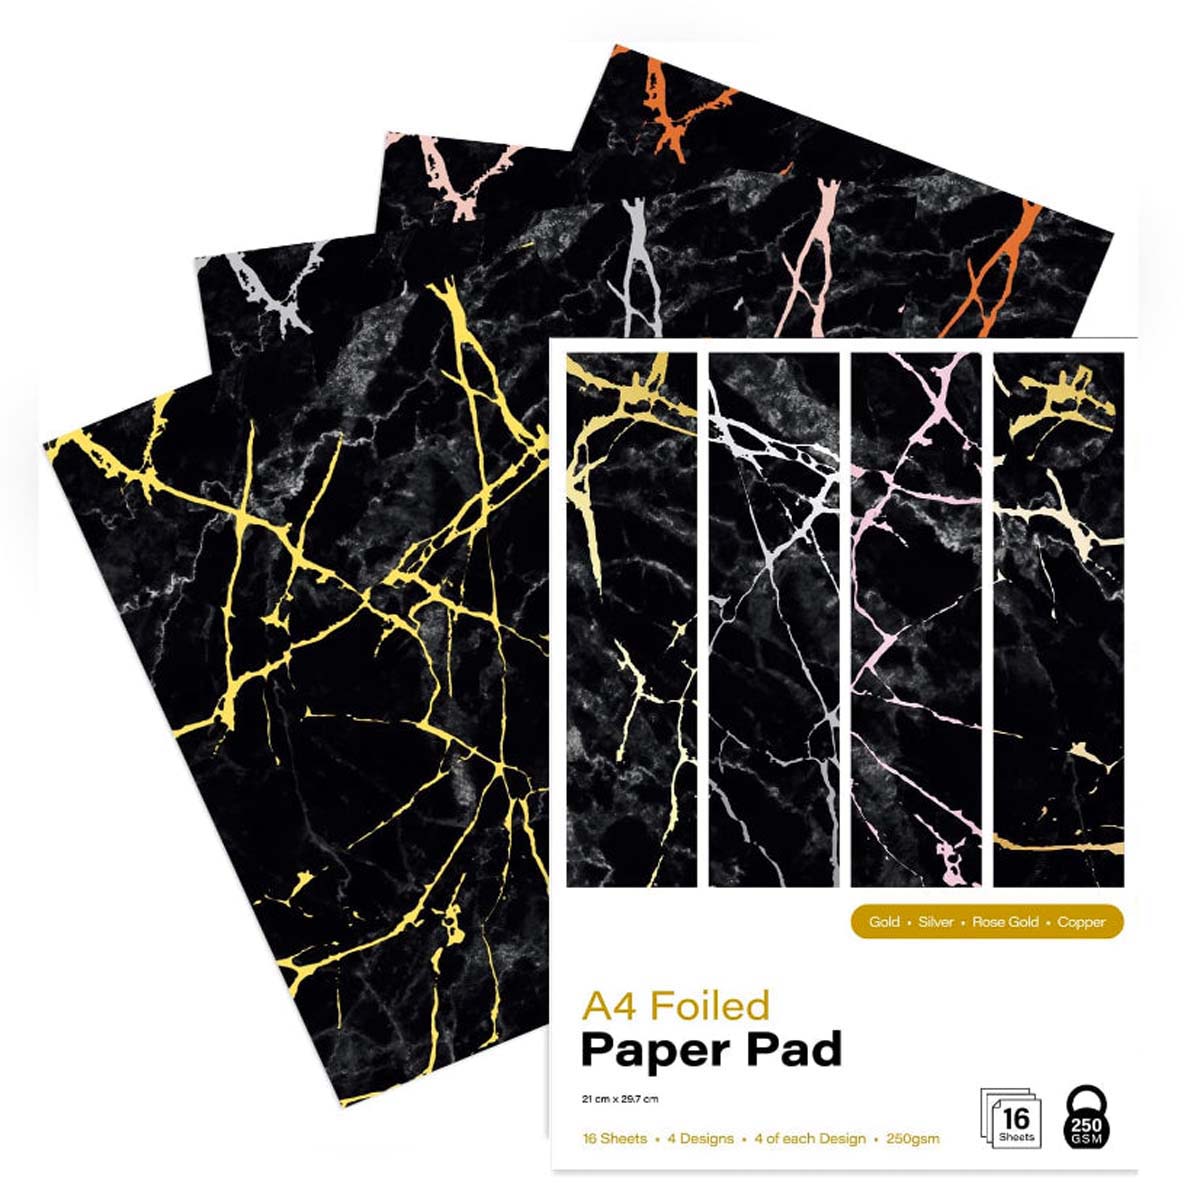 First Edition - A4 Foiled Paper Pad Black 250gsm